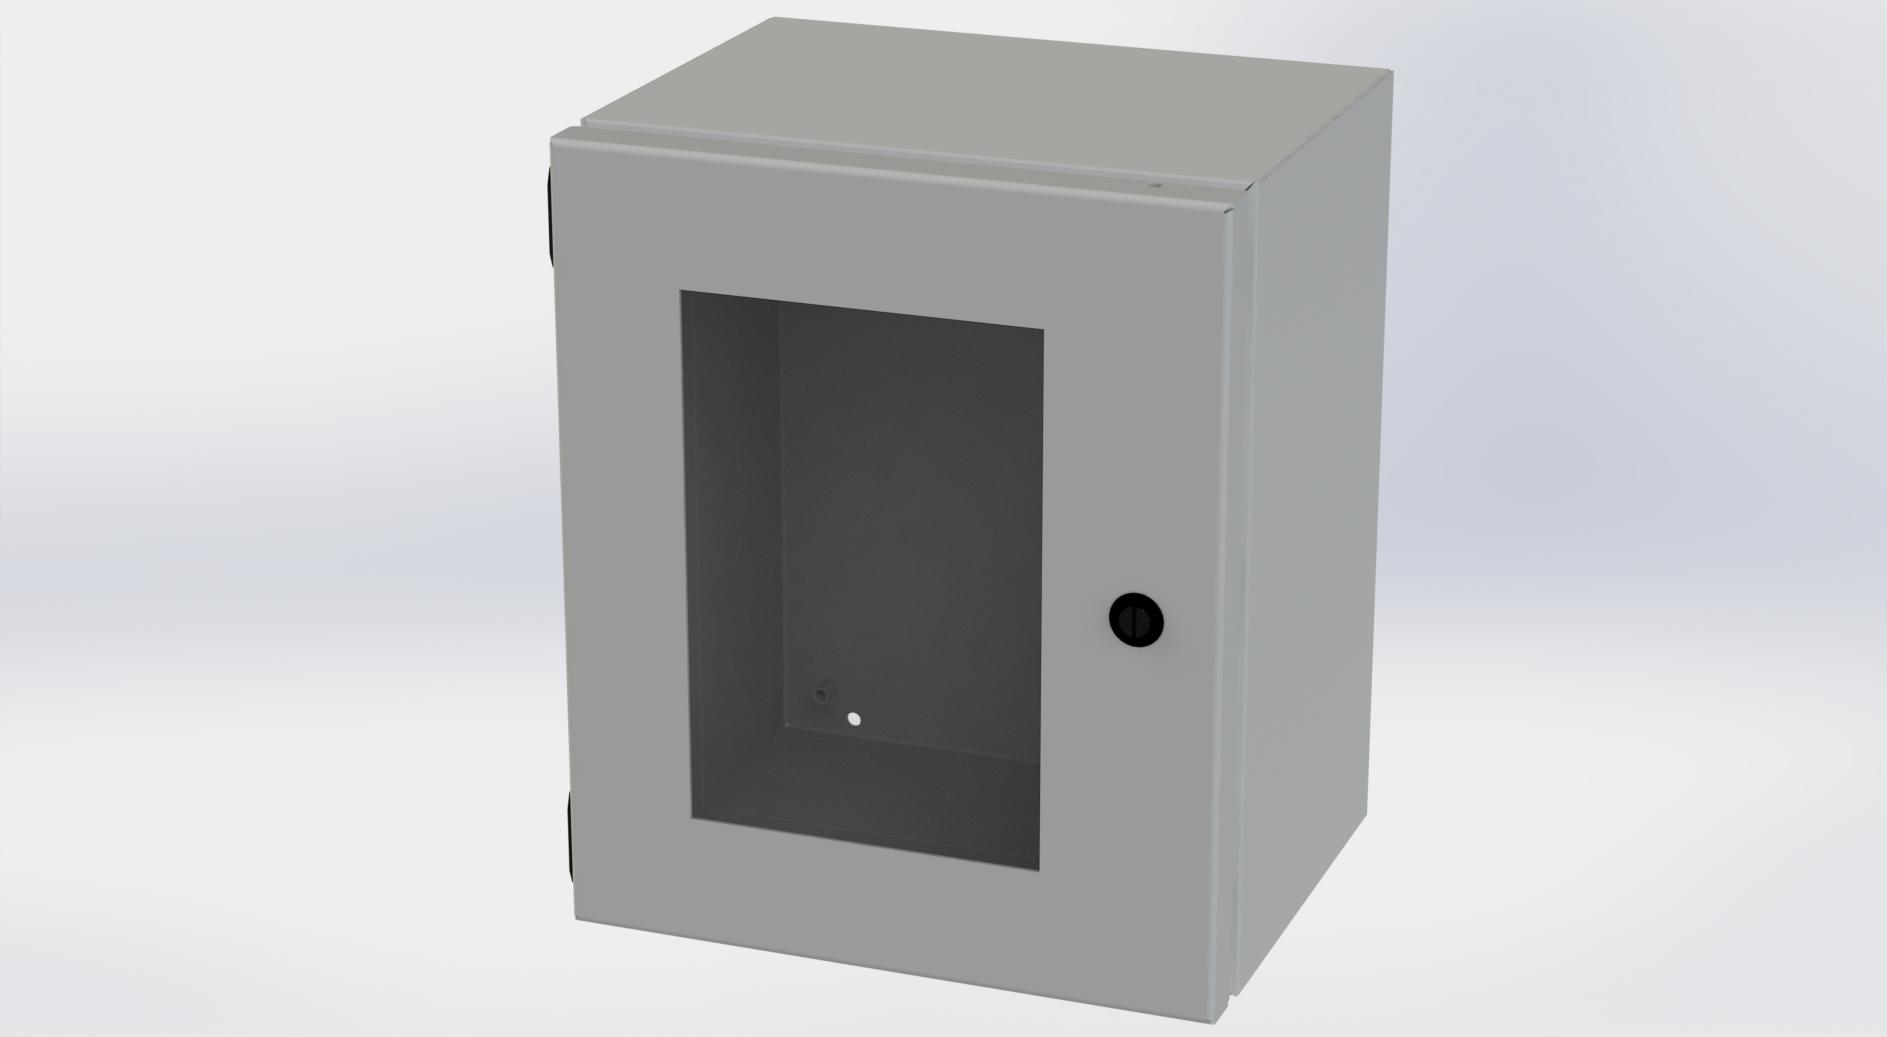 Saginaw Control SCE-12108ELJW ELJ Enclosure W/Viewing Window, Height:12.00", Width:10.00", Depth:8.00", ANSI-61 gray powder coating inside and out. Optional sub-panels are powder coated white.